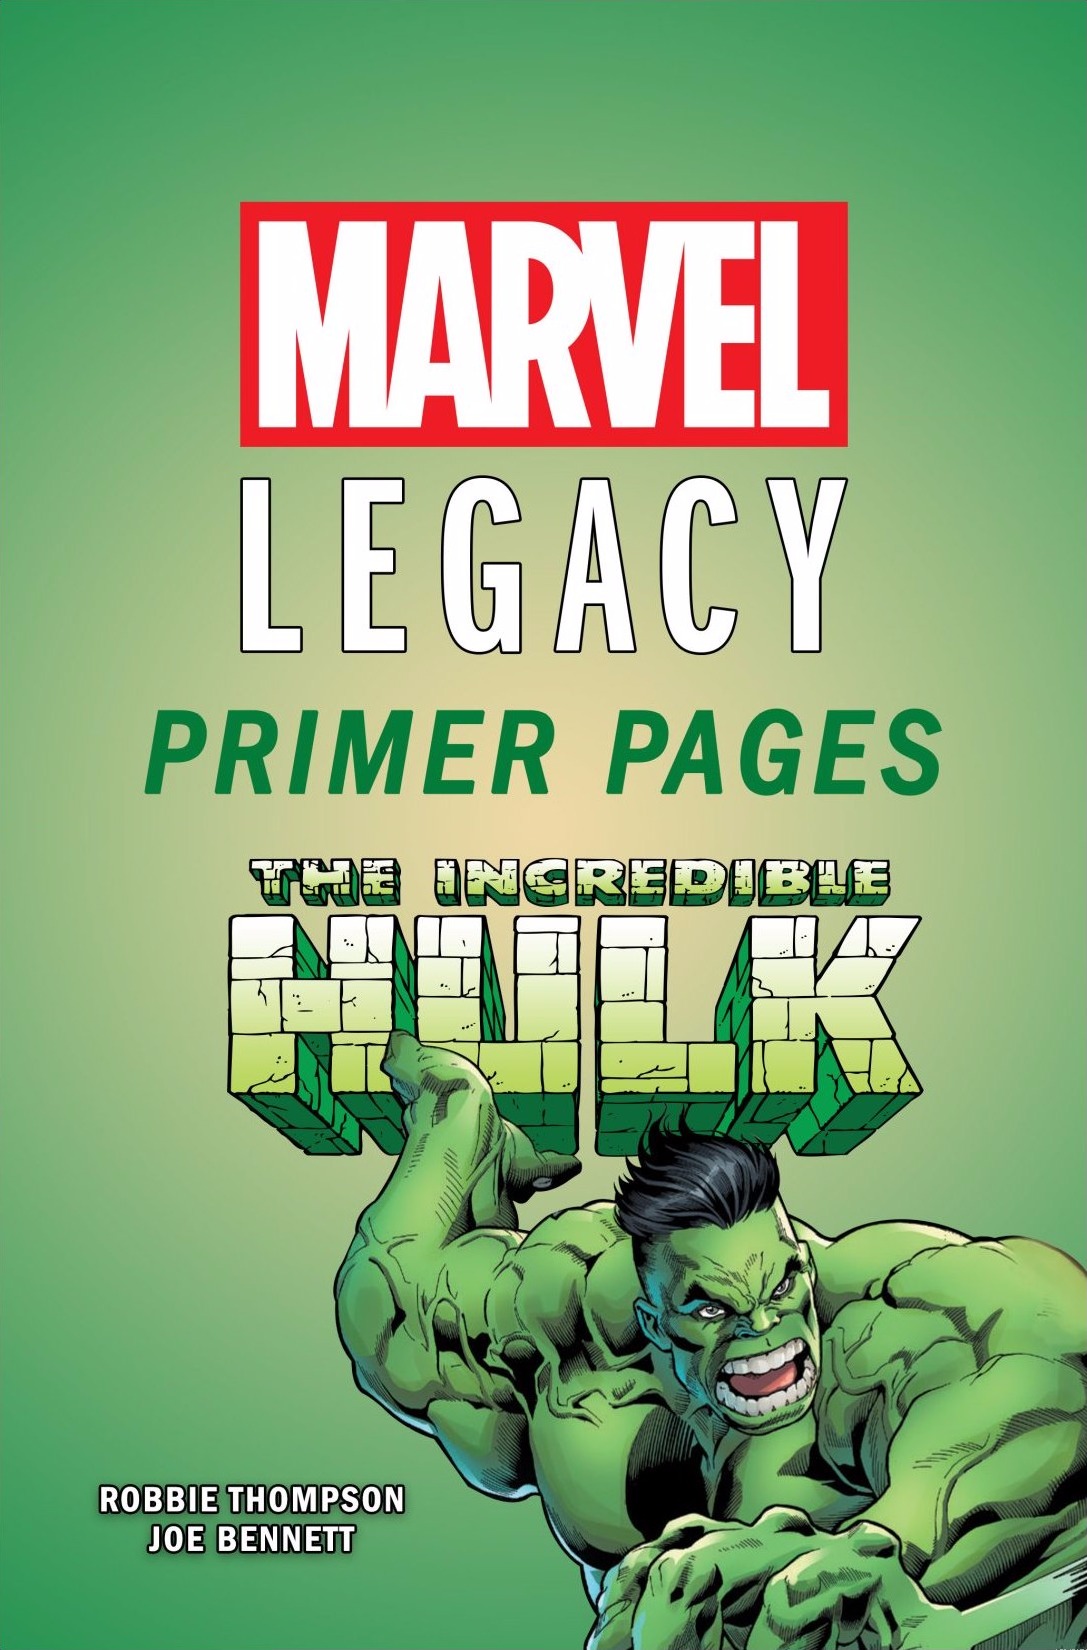 Read online Incredible Hulk (2017) comic -  Issue # Issue Incredible Hulk - Marvel Legacy Primer Pages - 1